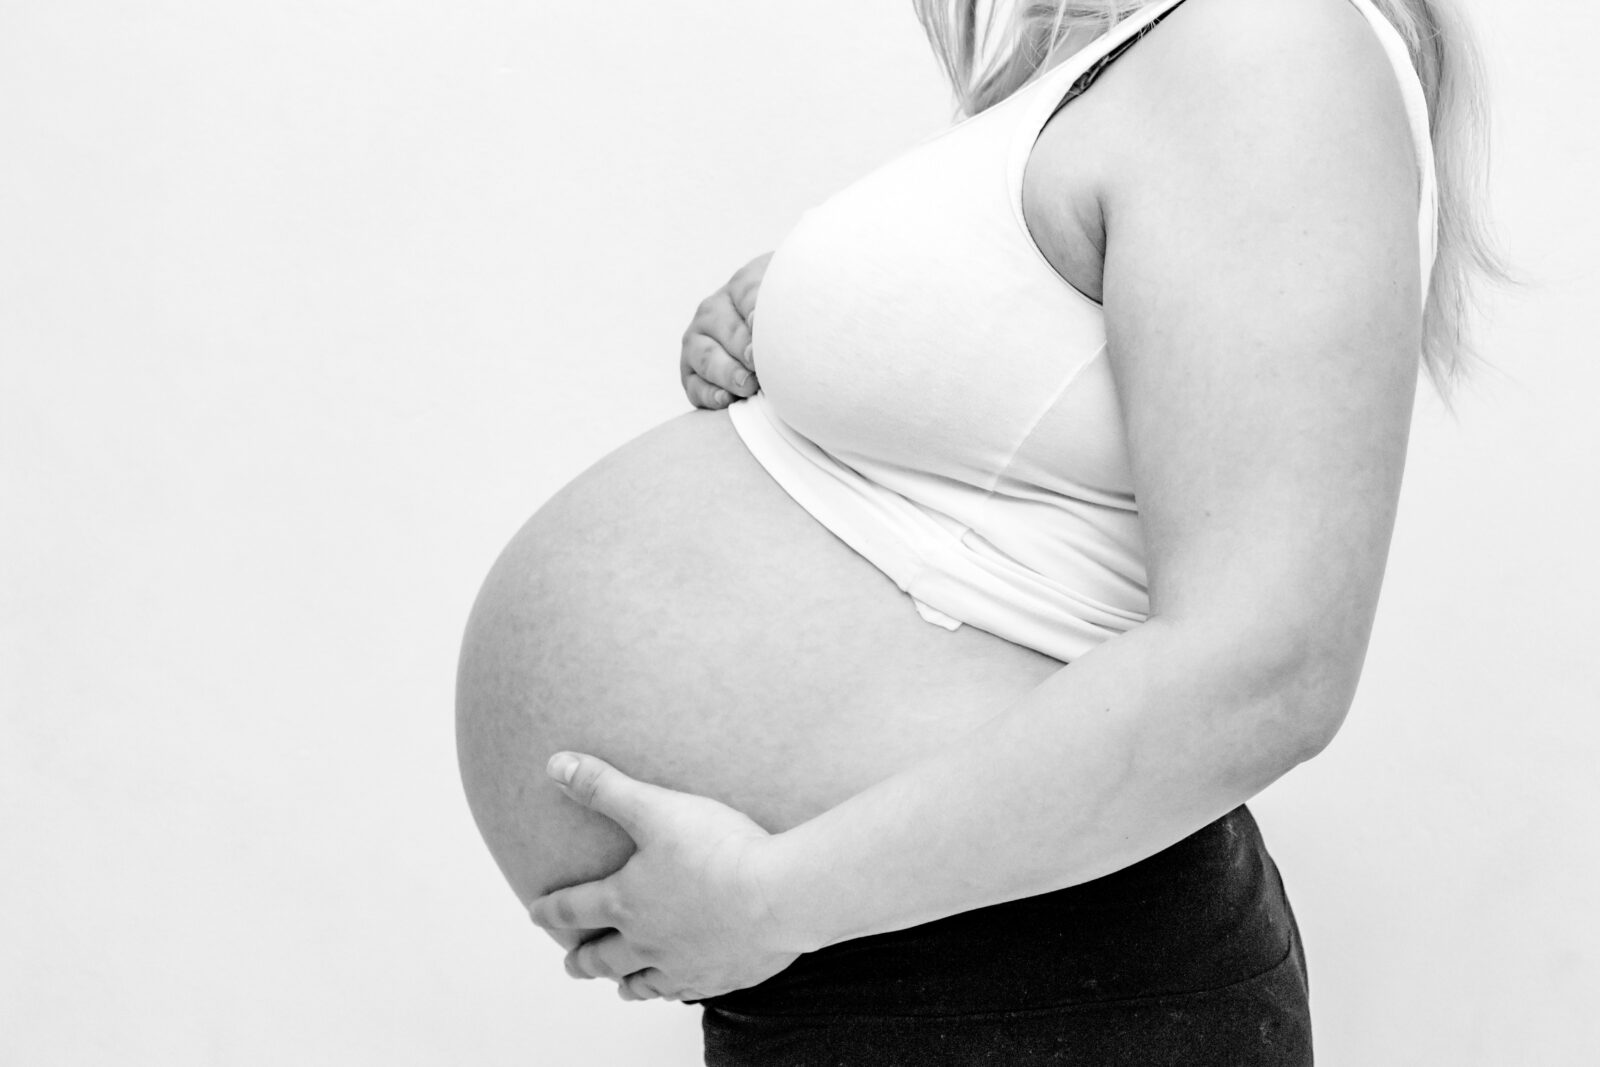 Pregnant women's experiences during the COVID-19 Pandemic